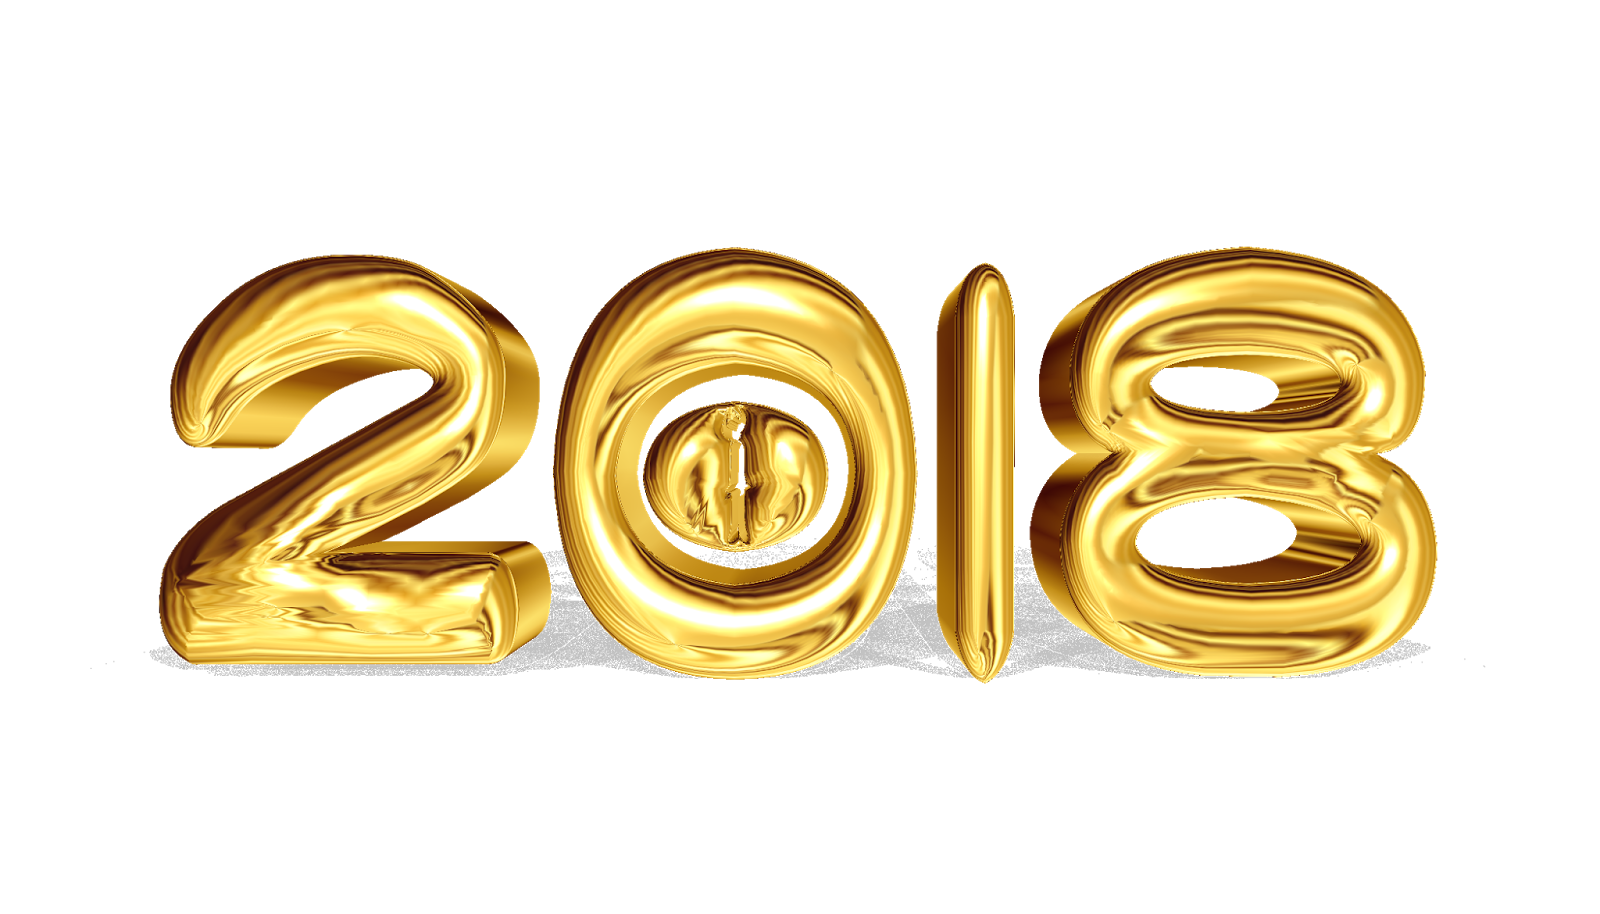 Images for happy new year 2018 3D HD | happy new year 3d ...